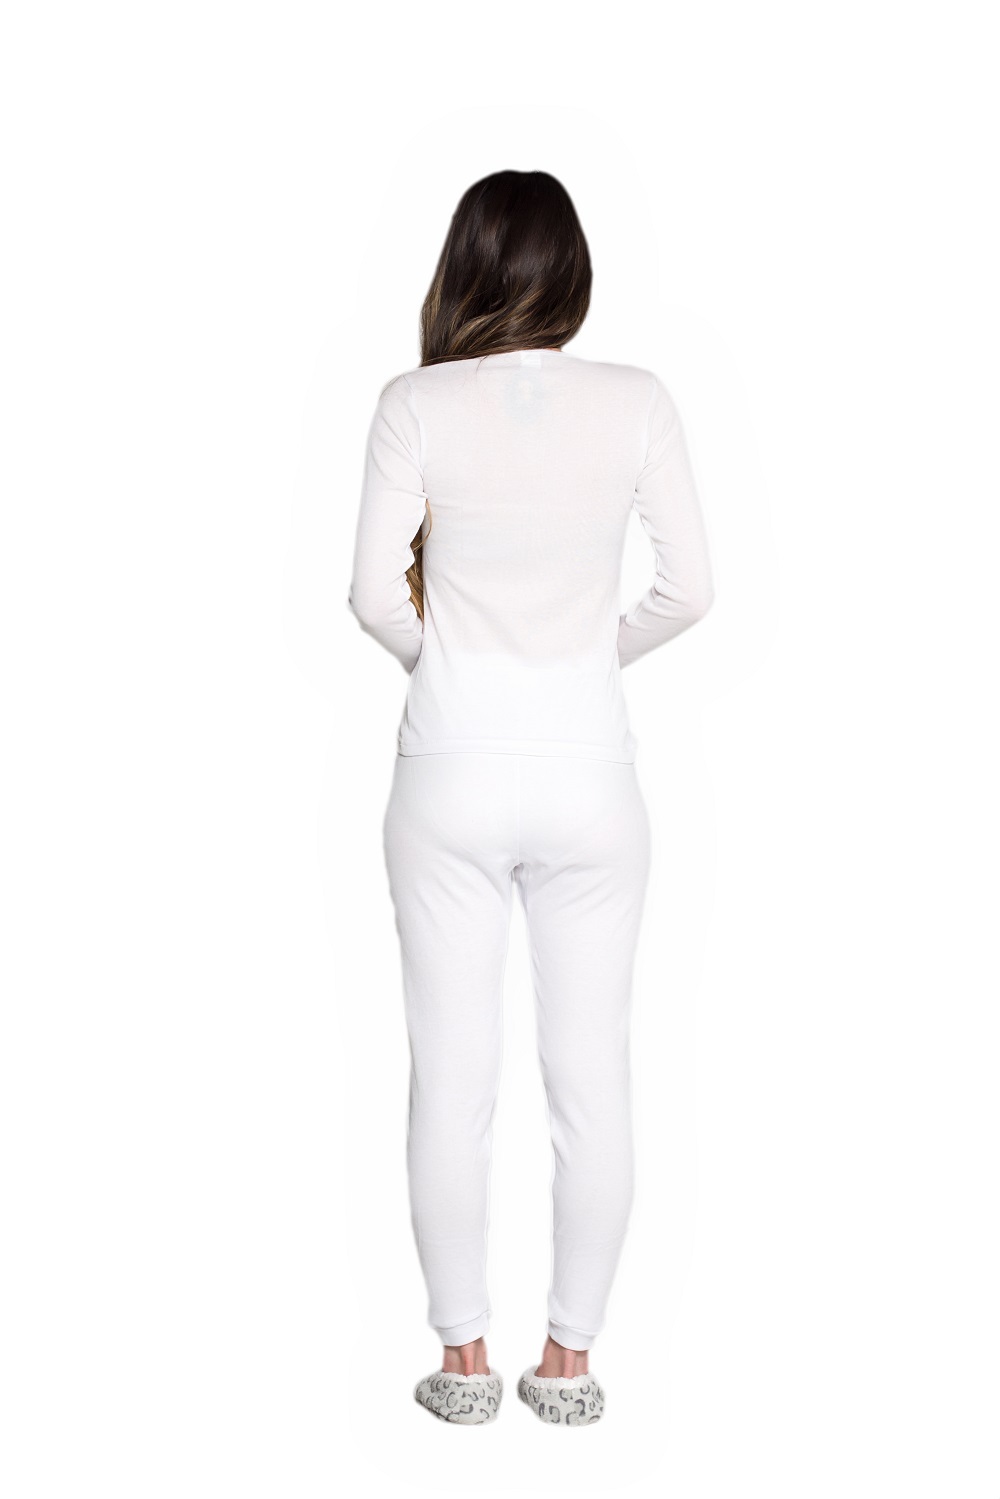 Ladies 2 Pack White Cotton Blend Thermal Underwear Spencer Long